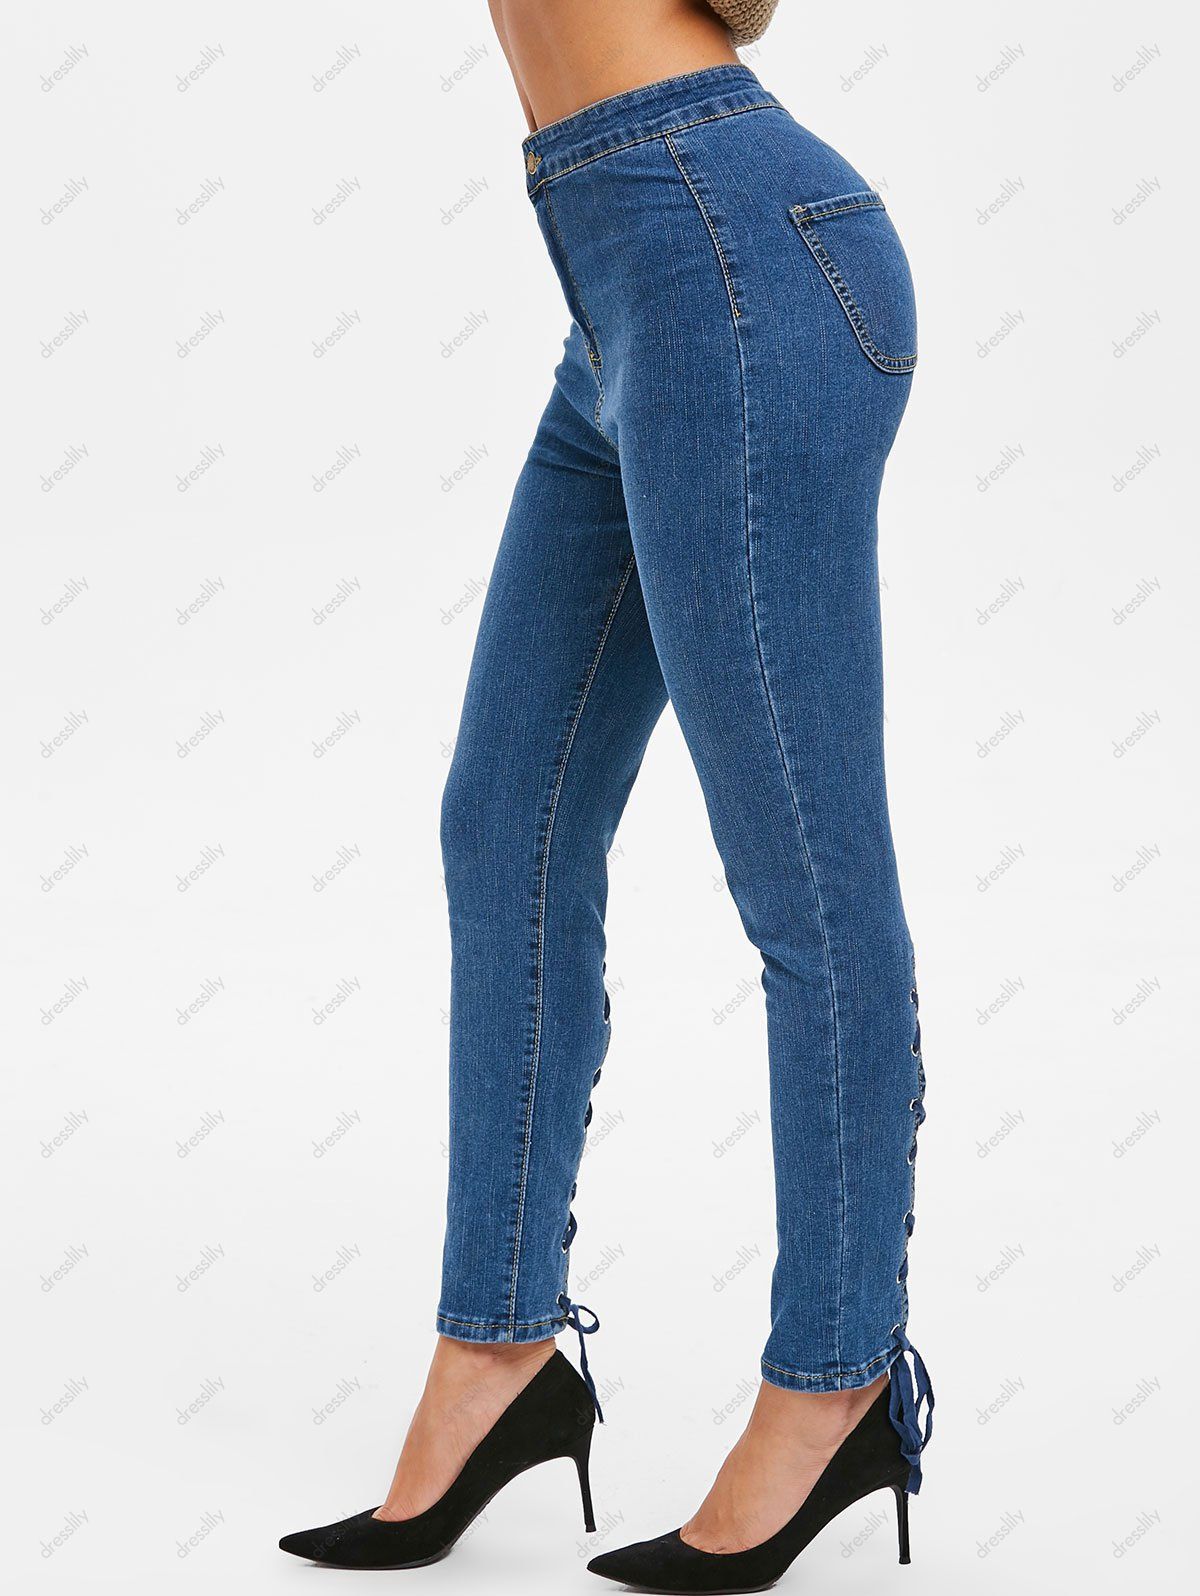 [30% OFF] 2021 Lace Up High Waisted Zipper Fly Jeans In DENIM DARK BLUE ...